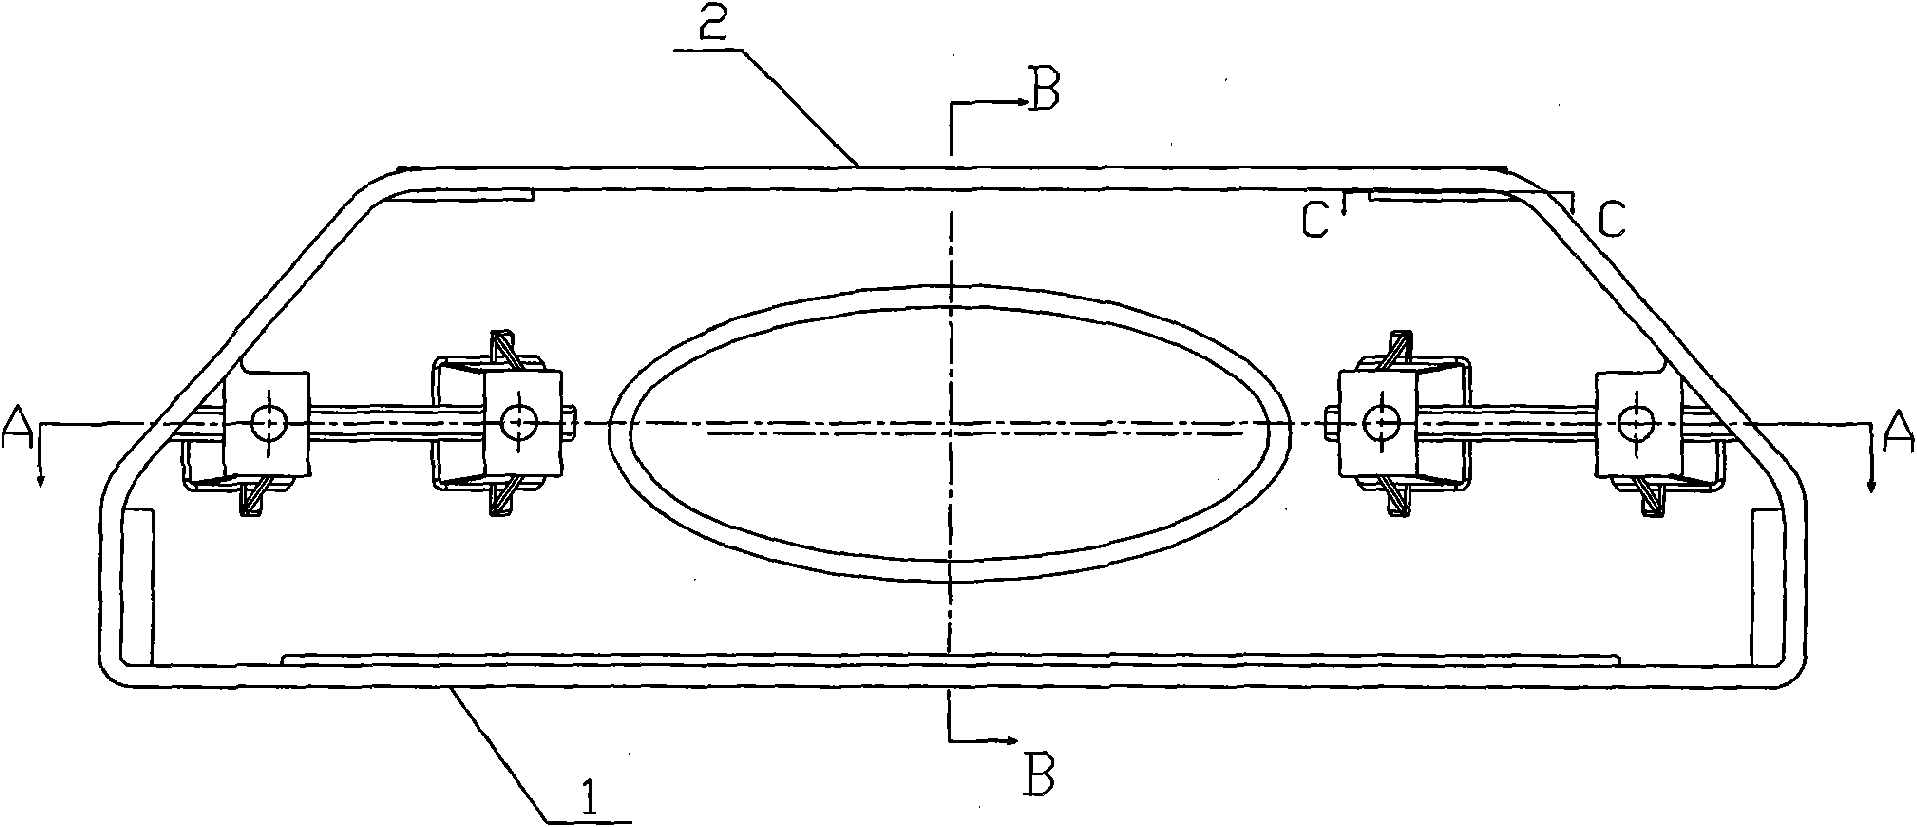 Processing technique for casting beam of automobile chassis